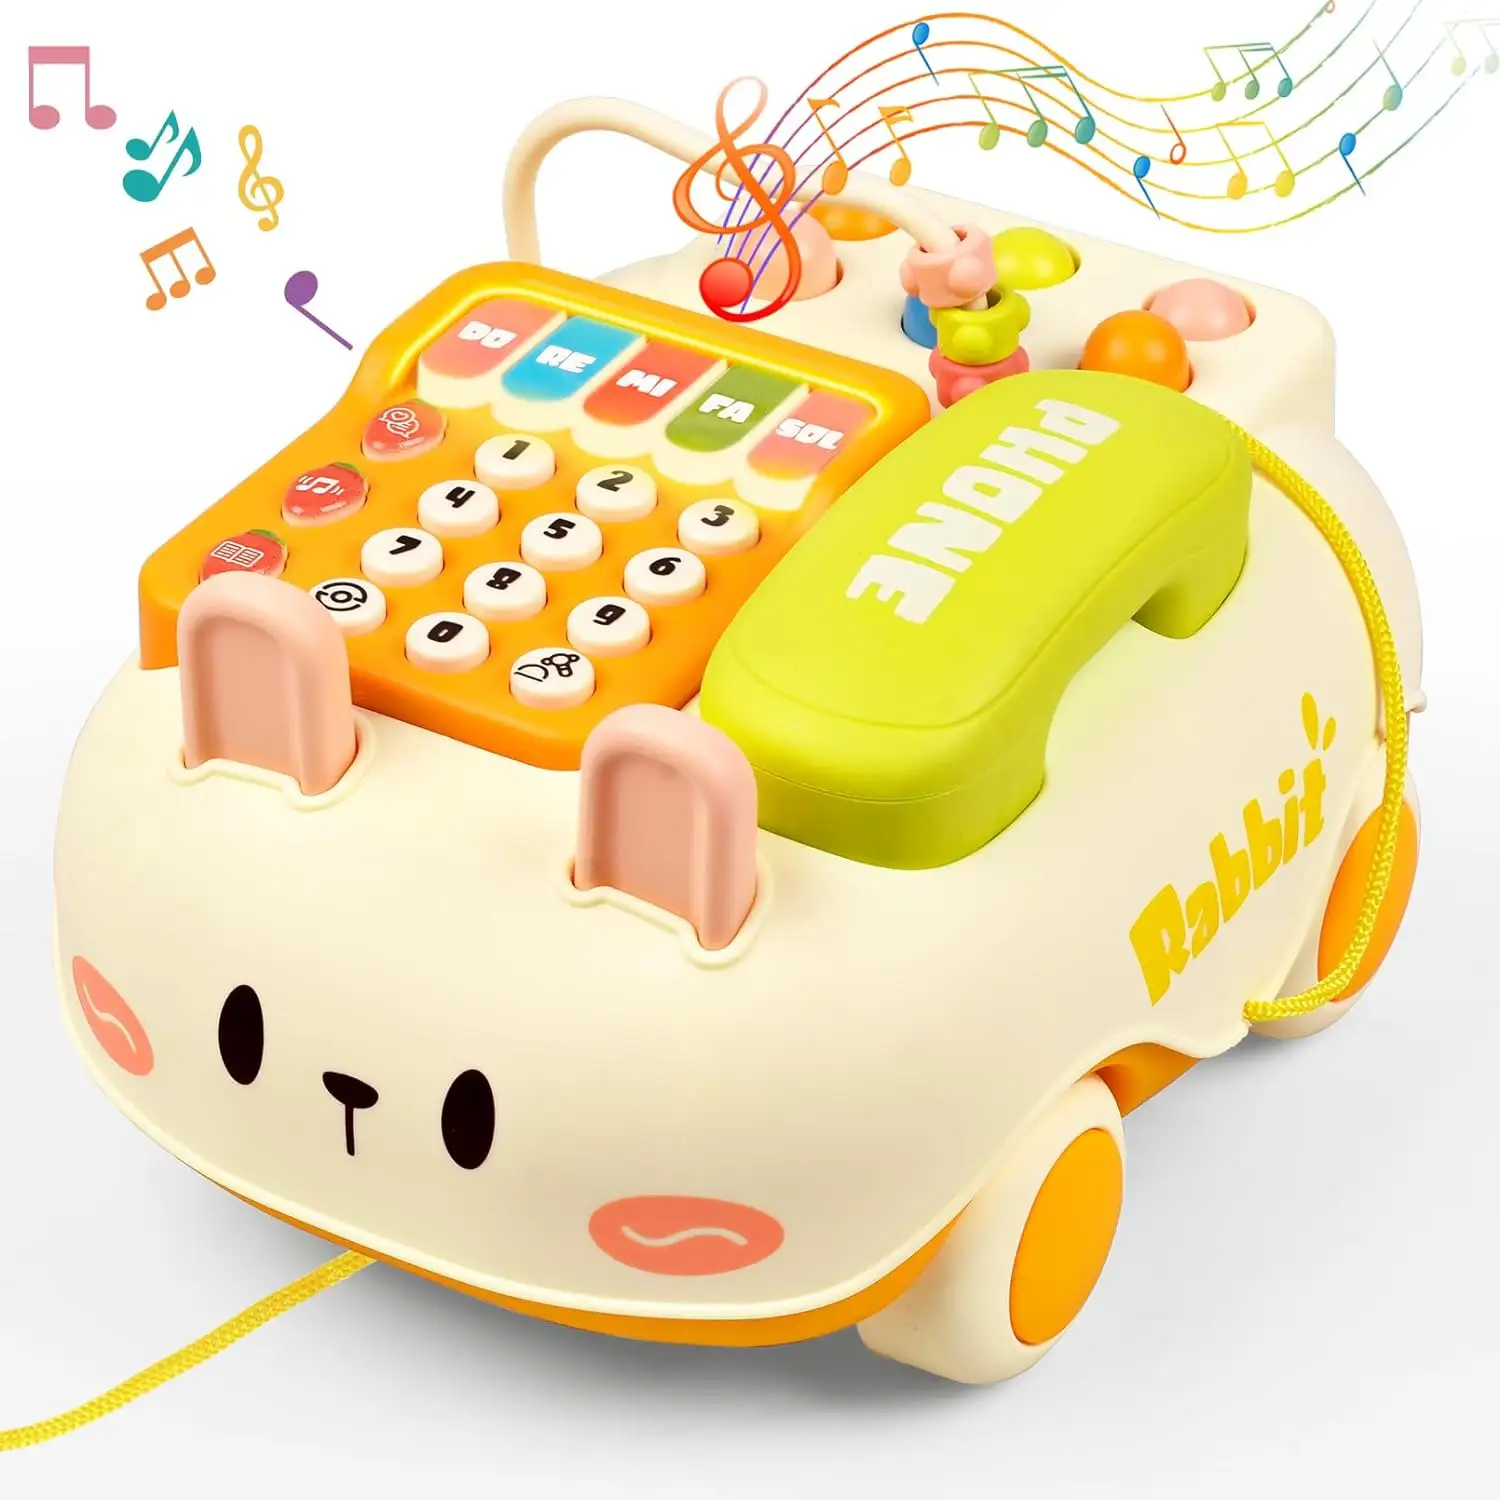 Education Music Toys Babies Simulation Telephones Toy For Kids 0 - 6 Months Baby Mobile Phone Educational Toy Telephone